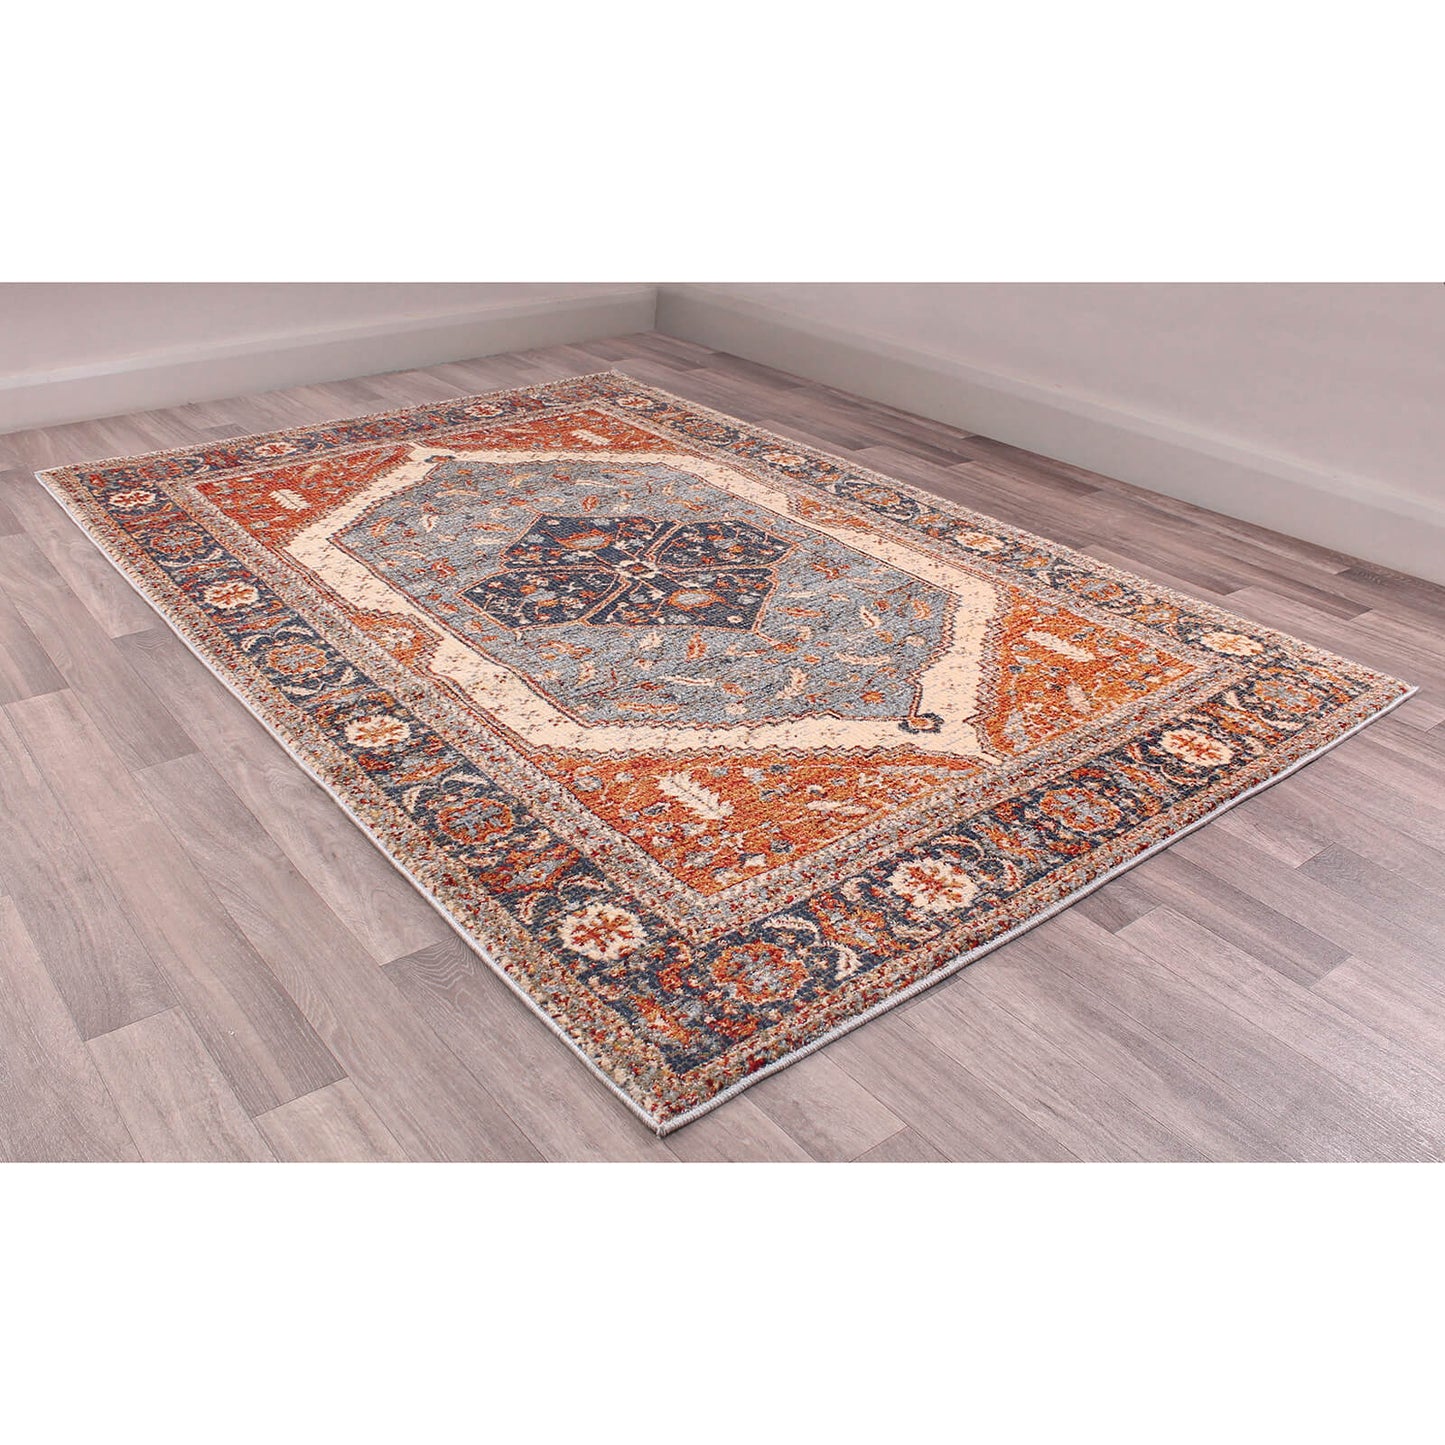 Ultimate Home Living Orient 2529 Cream Red Rug